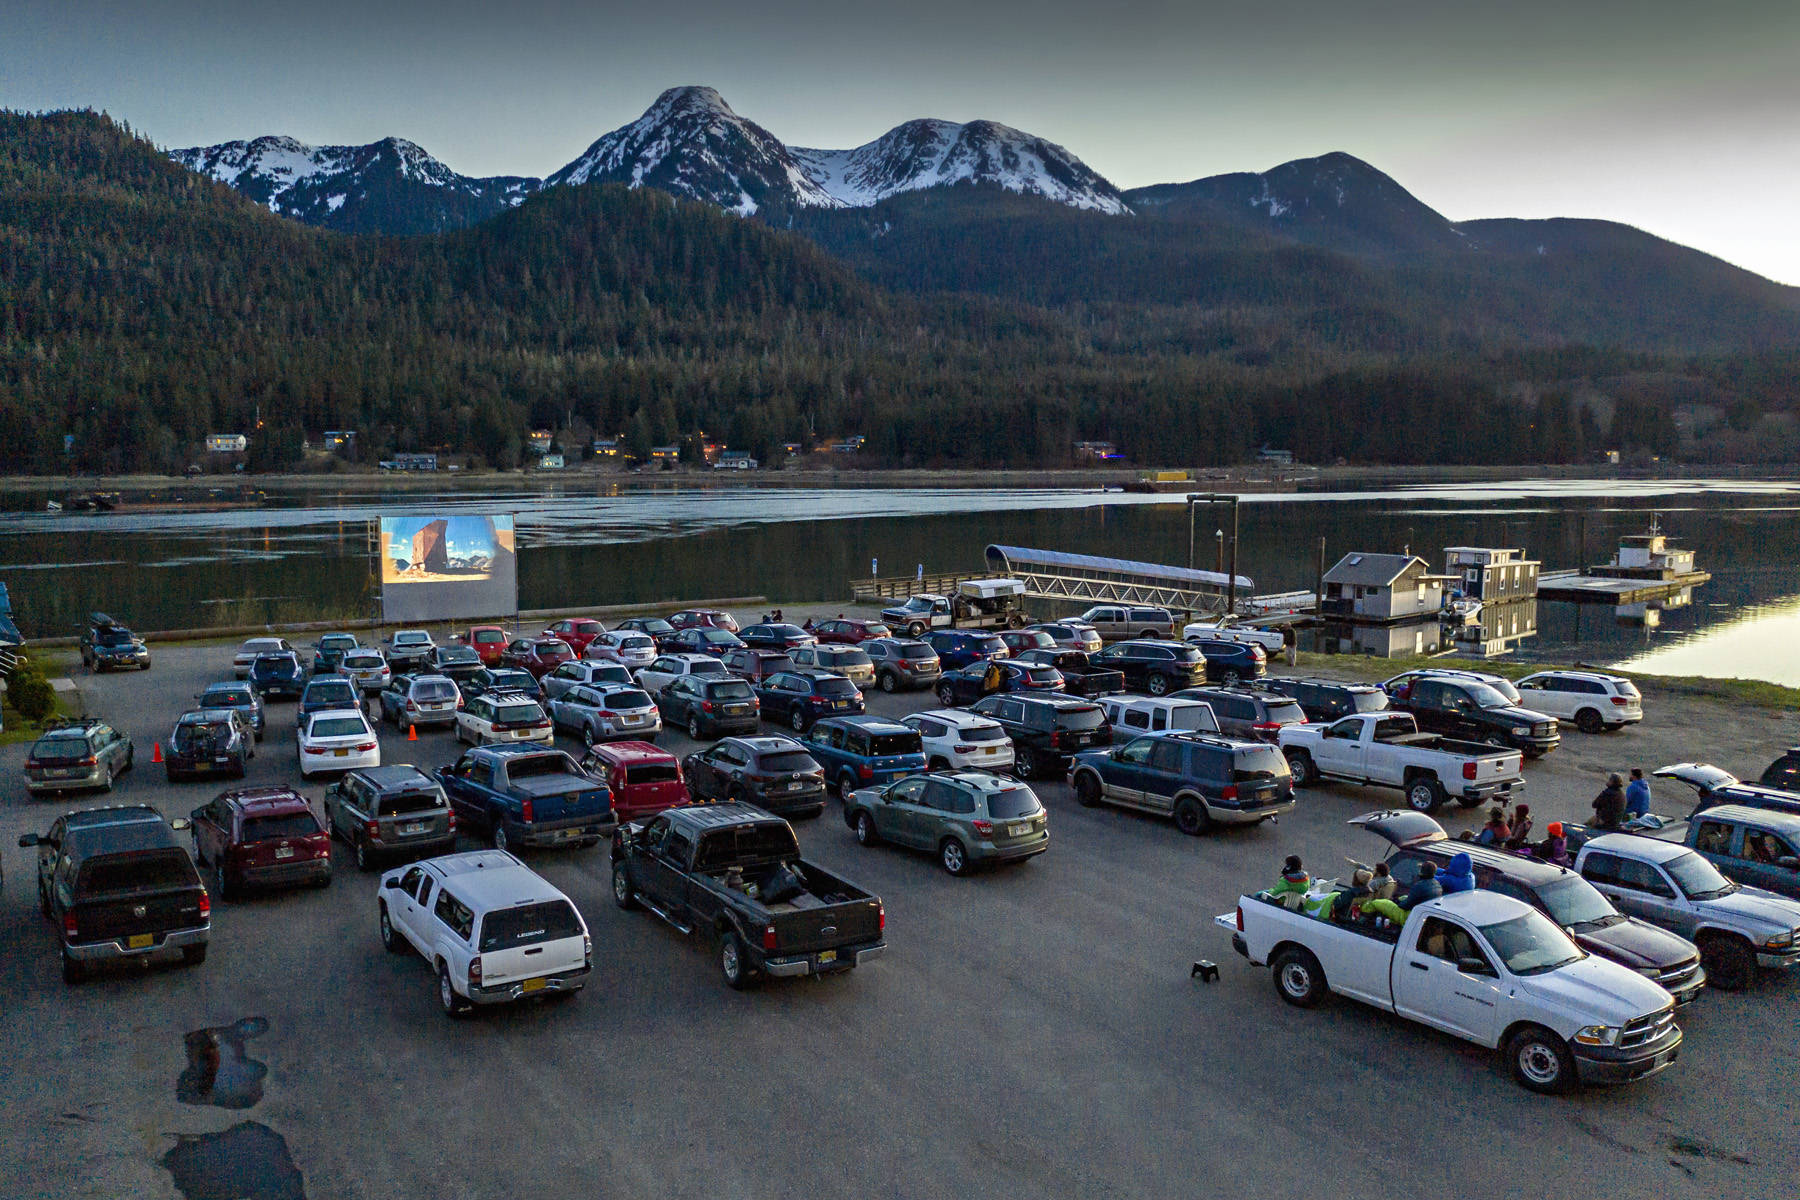 Juneau residents gather at the Gold Town Nickelodeons pop-up drive-in theatre to watch Star Wars: A New Hope on Star Wars Day, May 4, 2020. Screenings at the temporary outdoor theater will continue this week. (Christopher Miller | csmphotos.com)